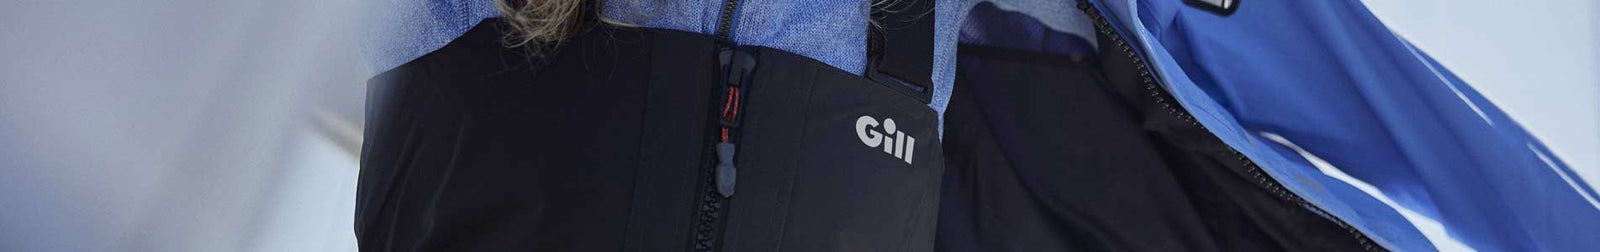 Gill Sailing Trousers | Waterproof Sailing Trousers and Salopettes | ArdMoor 